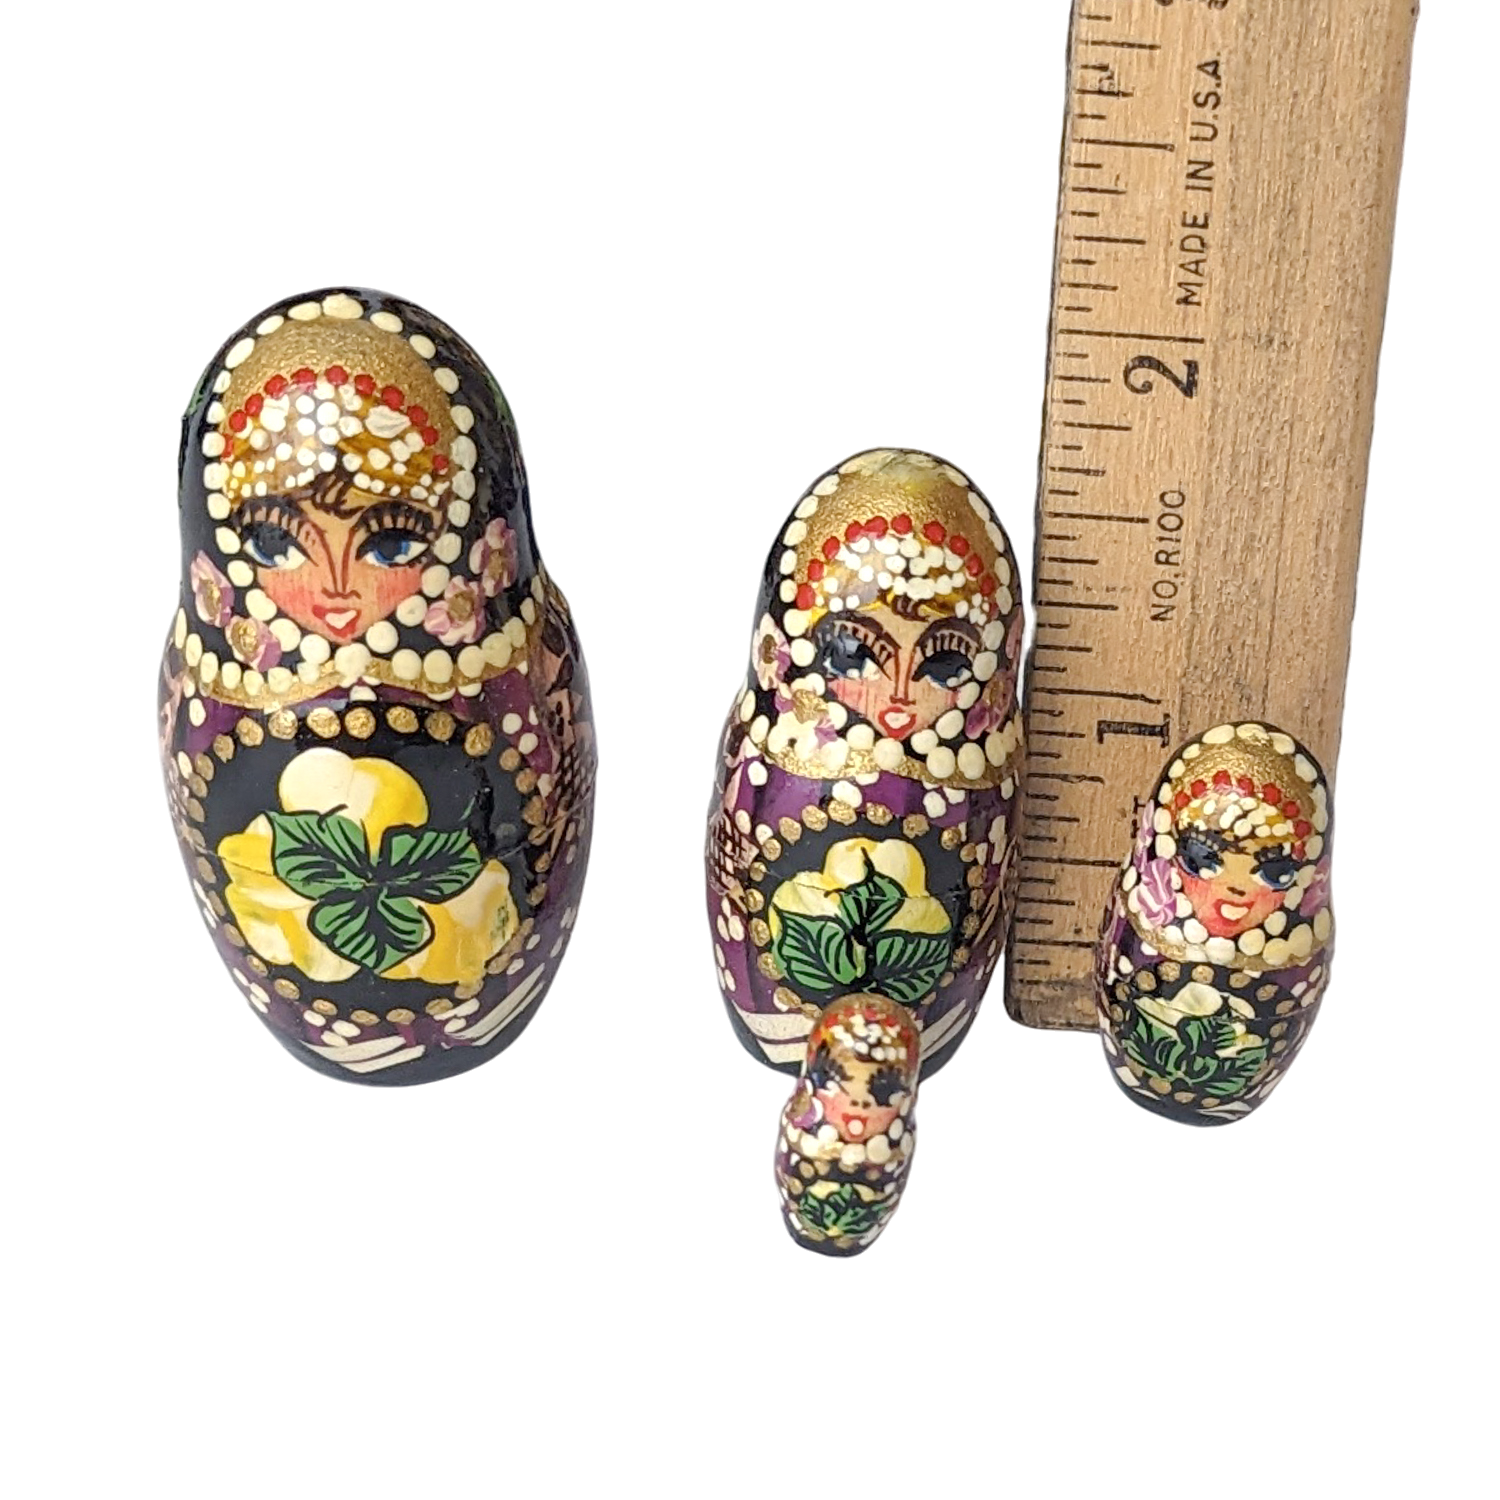 Hand Painted Russian 10 Piece Nesting Doll